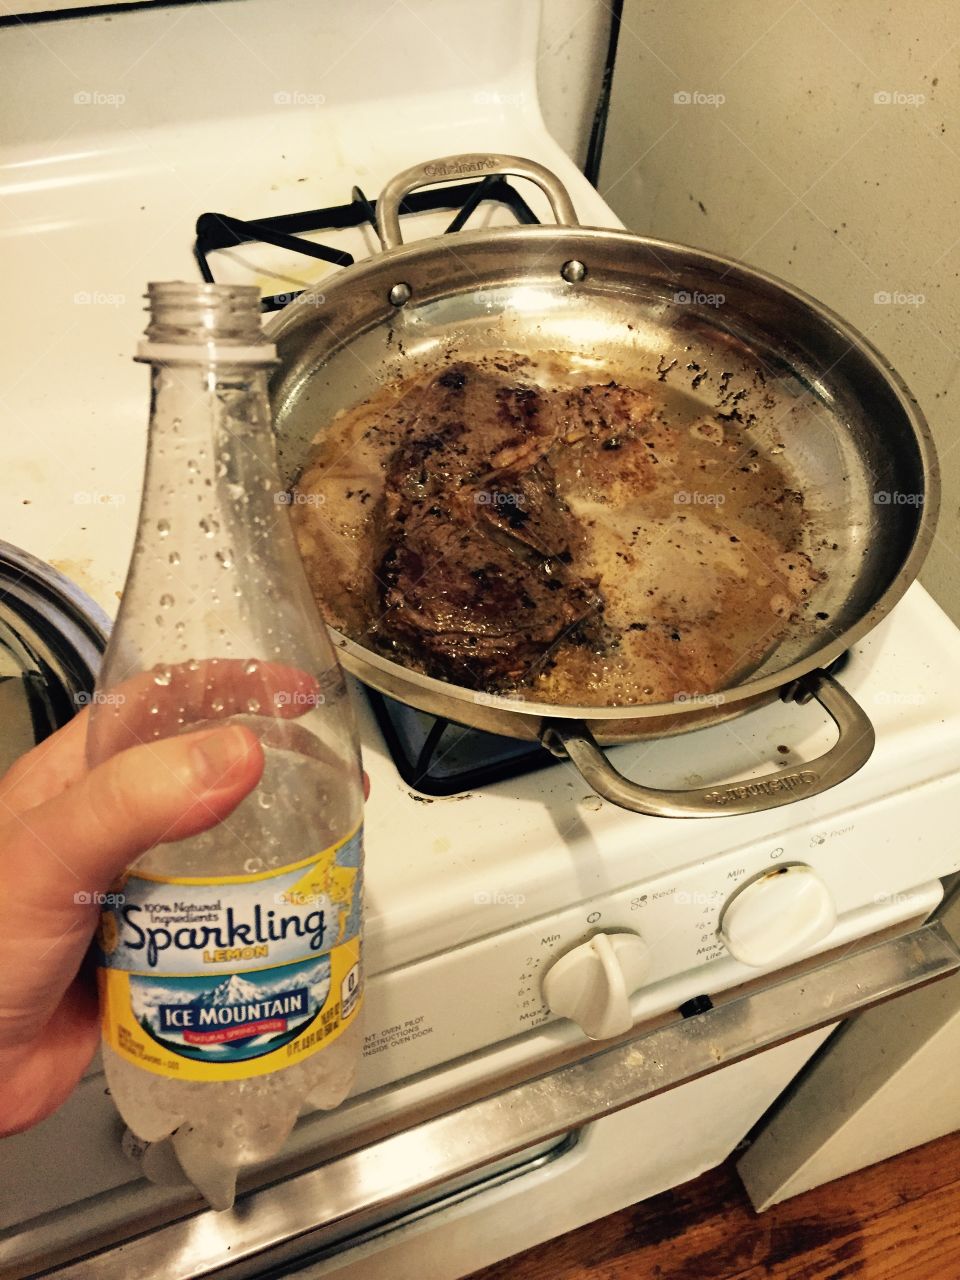 Steak and sparkling water